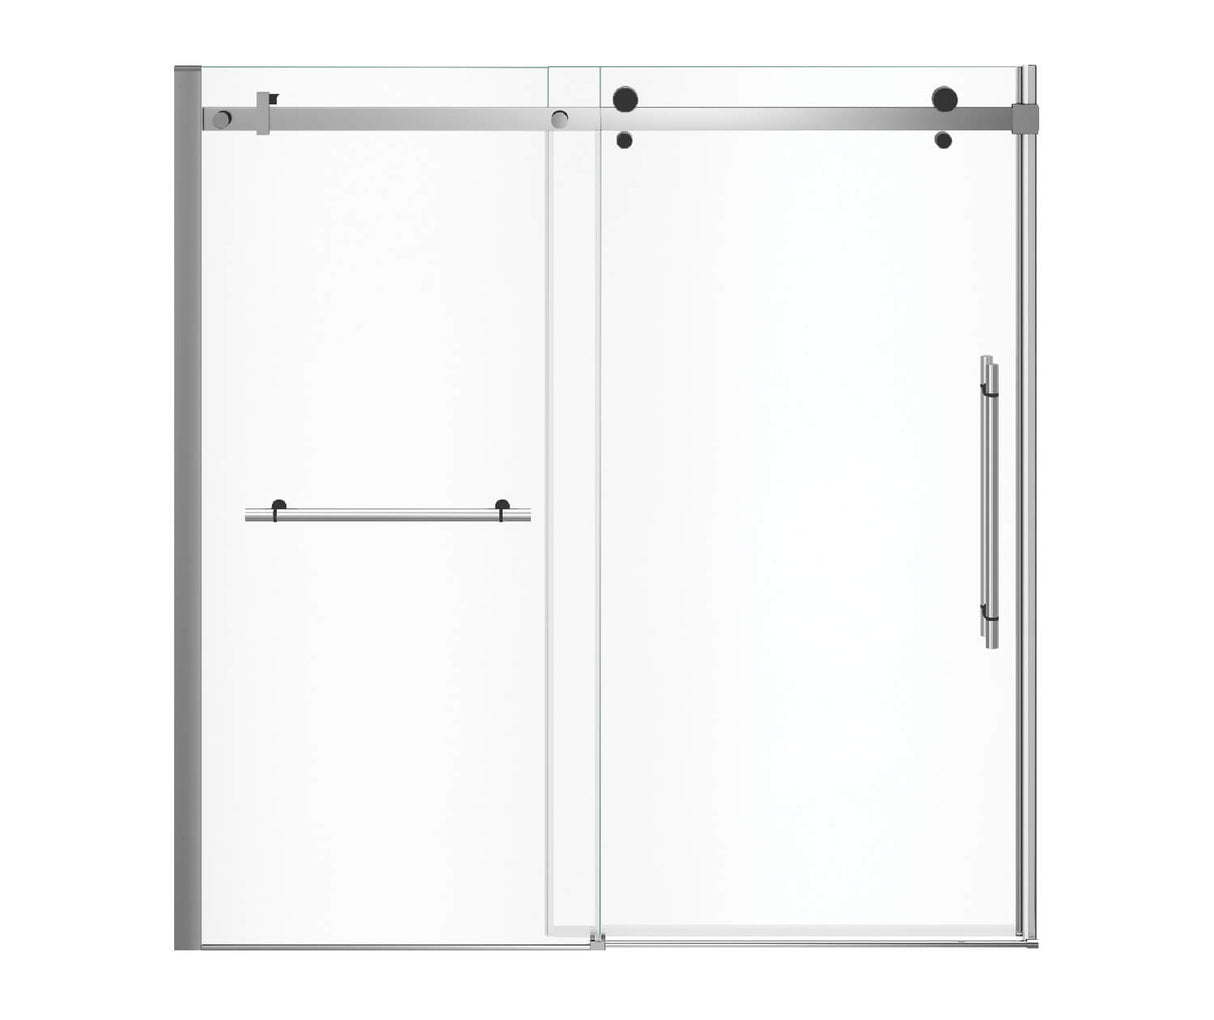 MAAX 138485-900-350-000 Vela 56 ½-59 x 59 in. 8 mm Sliding Tub Door with Towel Bar for Alcove Installation with Clear glass in Chrome and Matte Black